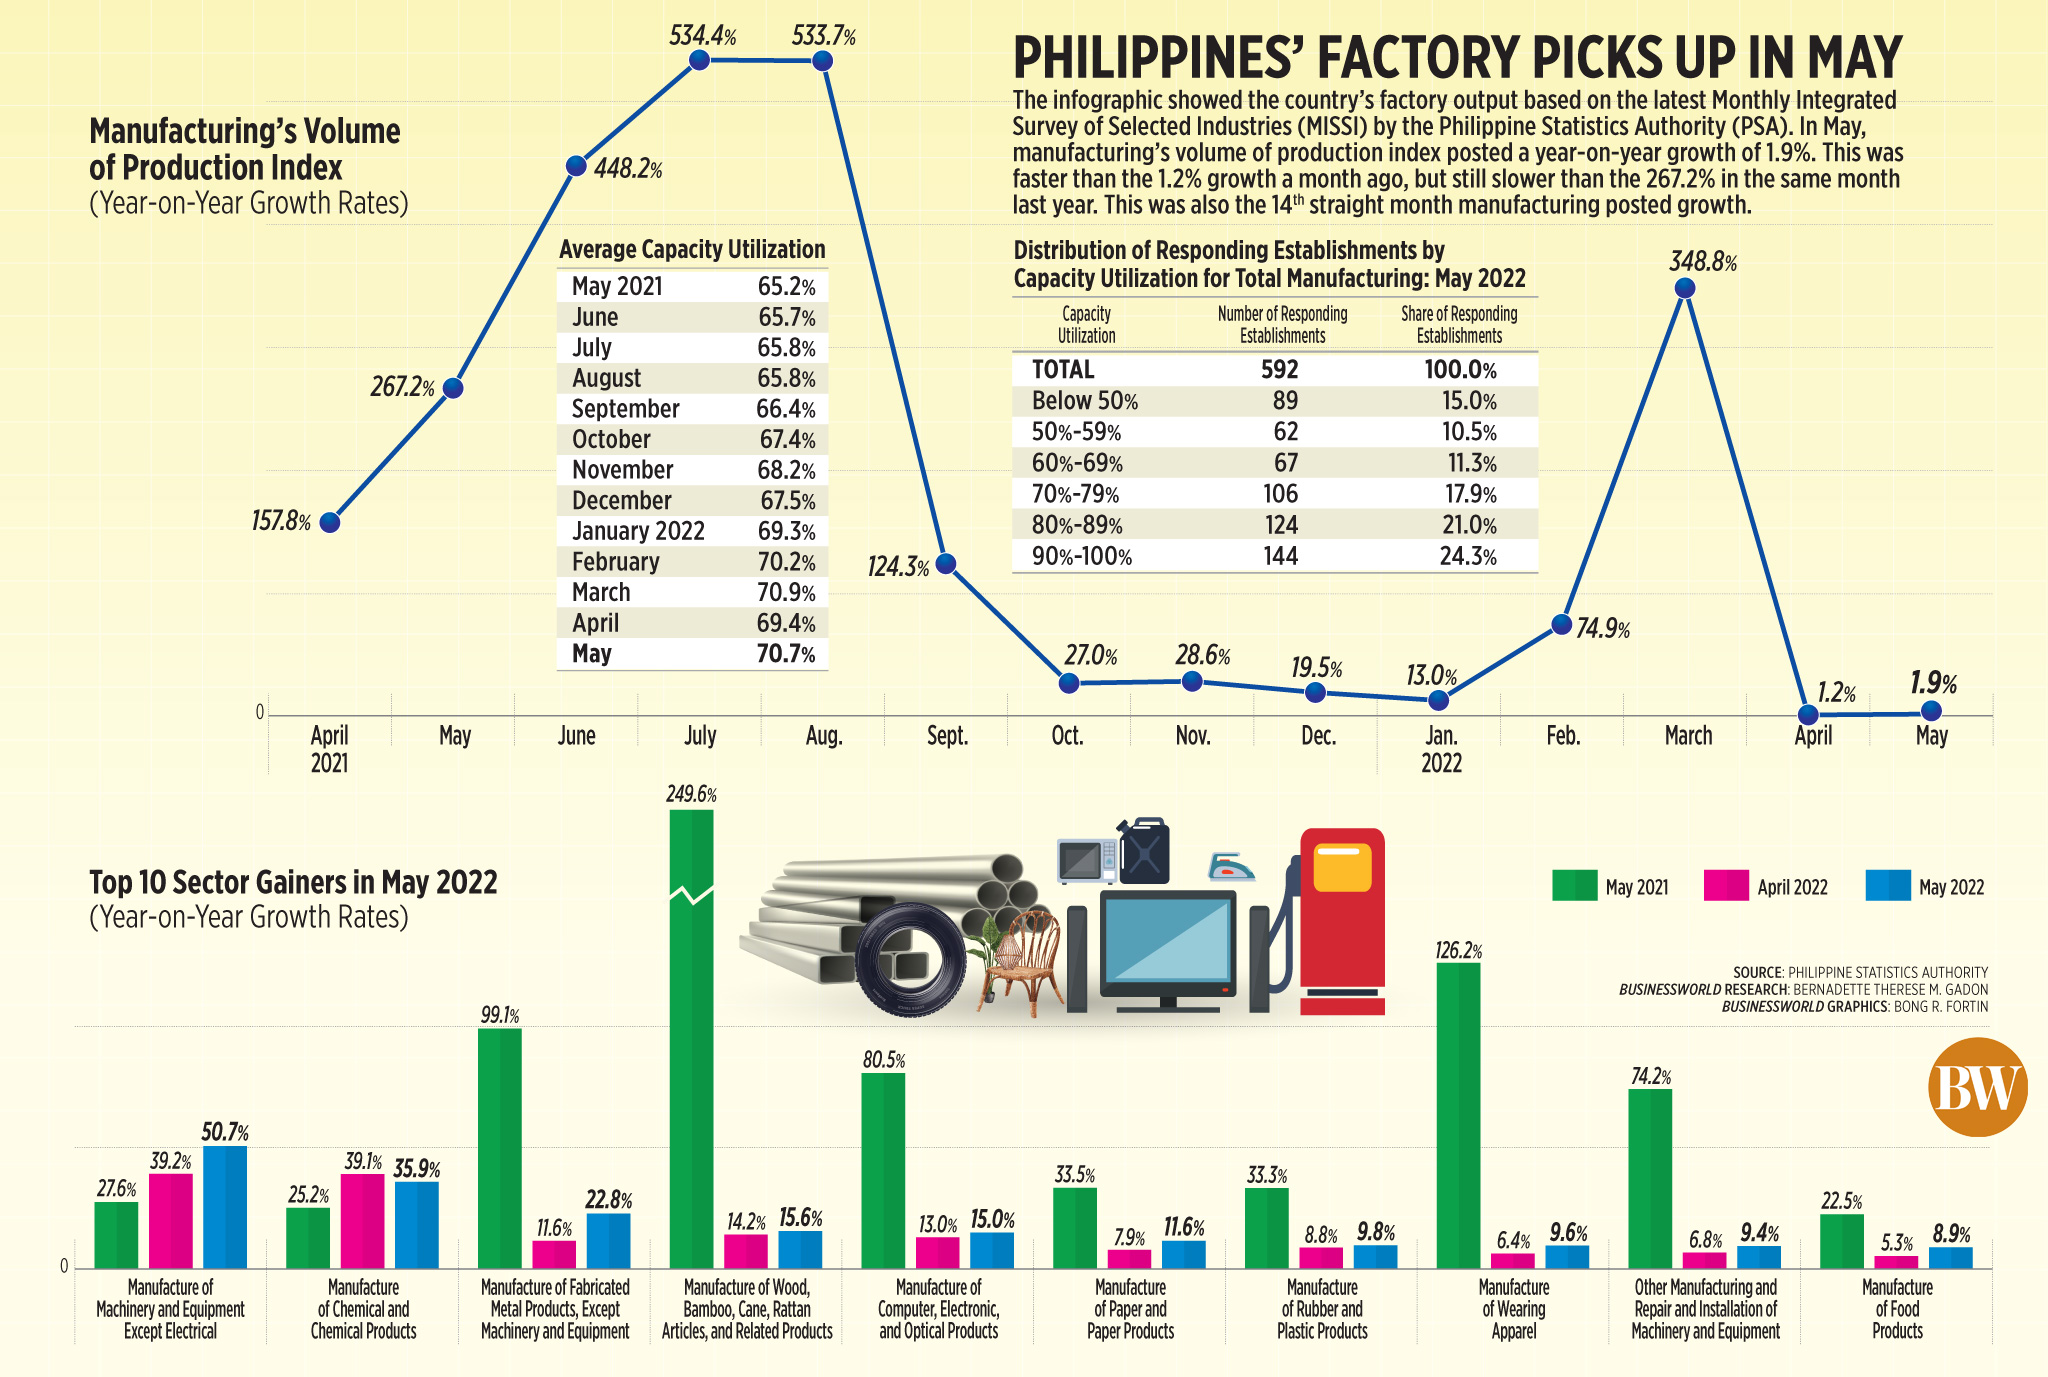 Philippines’ factory picks up in May